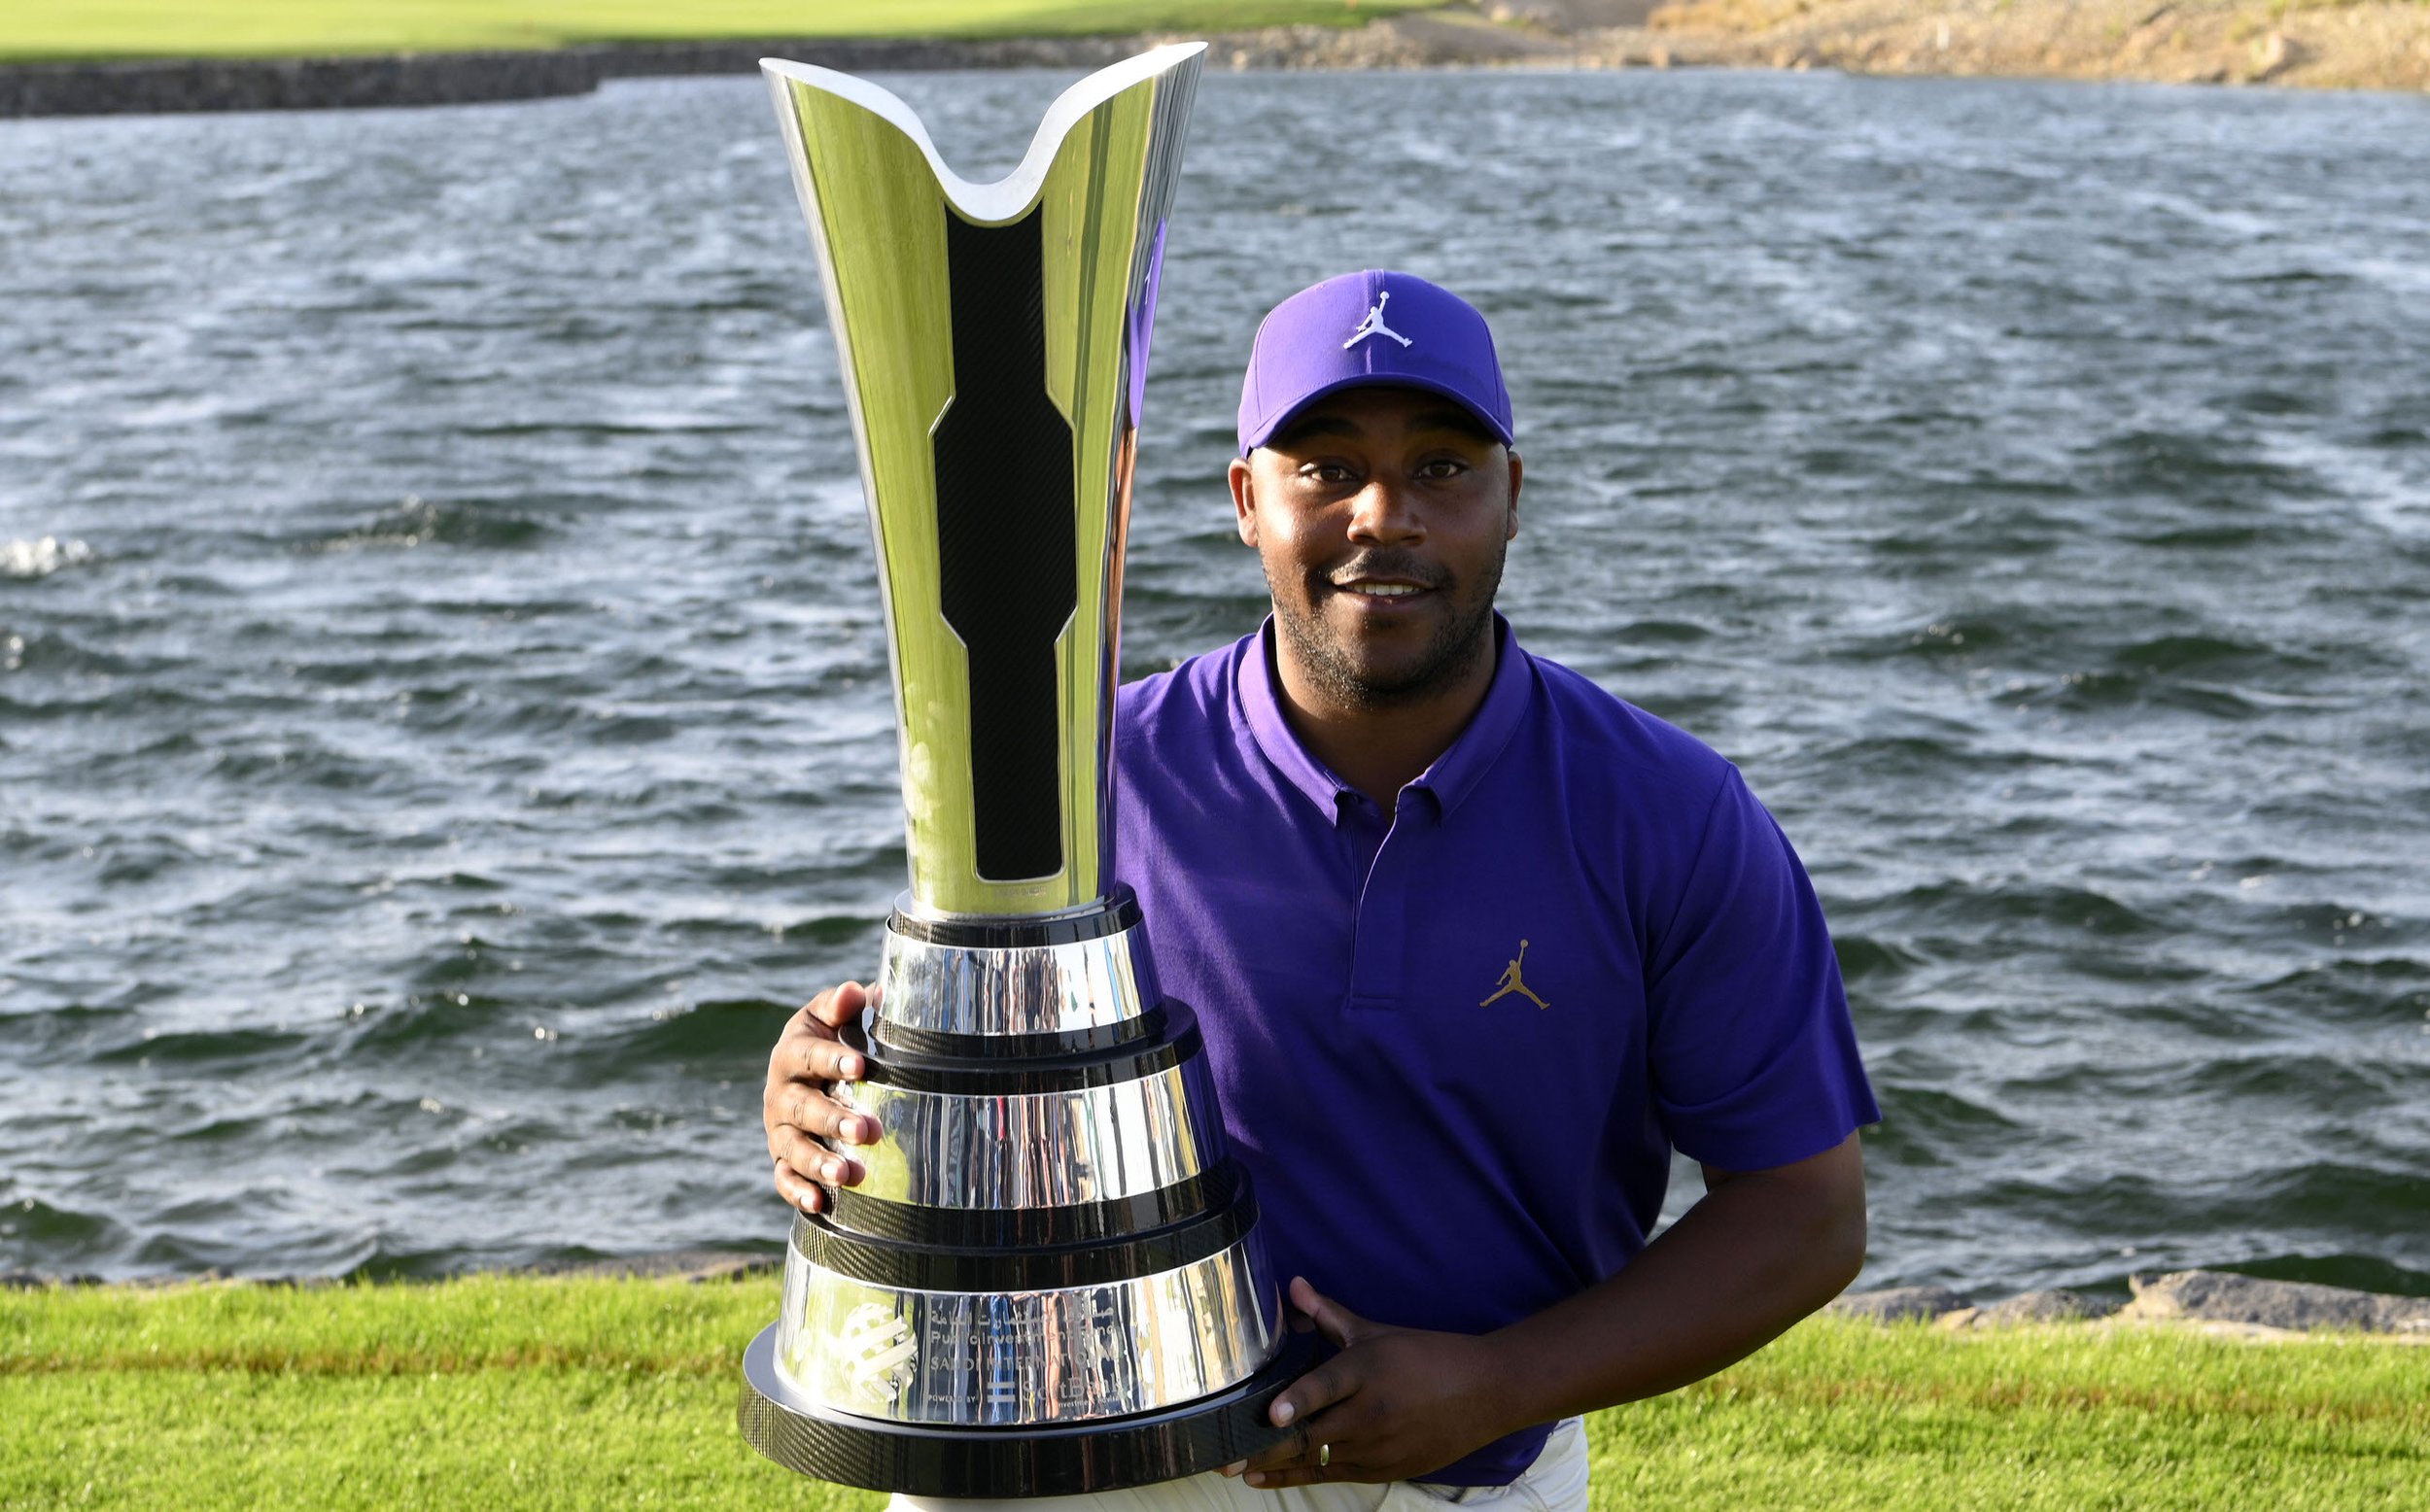  KAEC-SAUDI-ARABIA - Harold Varner III of the USA pictured on Sunday, February 6, 2022 with the winner’s trophy after the final round of the US$ 5 million PIF Saudi International powered by SoftBank Investment Advisers. The event is staged from Febru